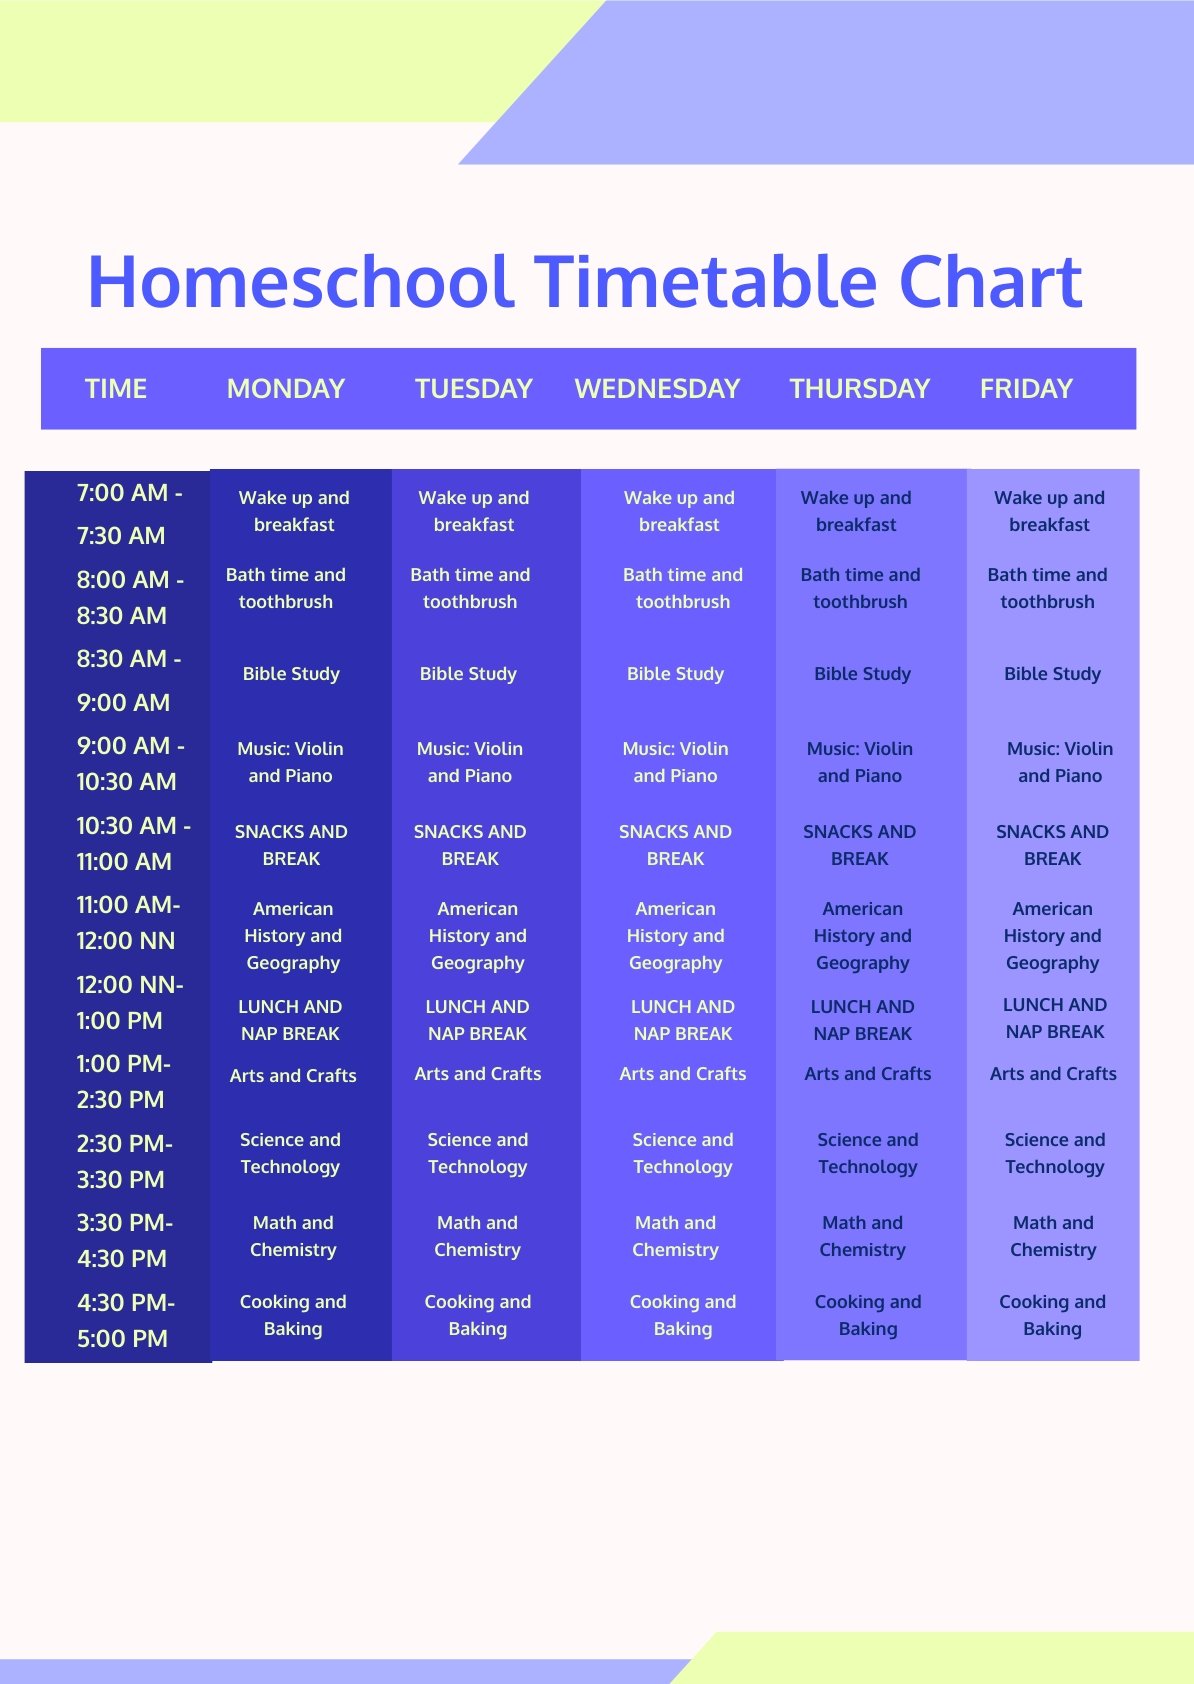 Home School Timetable Chart Template